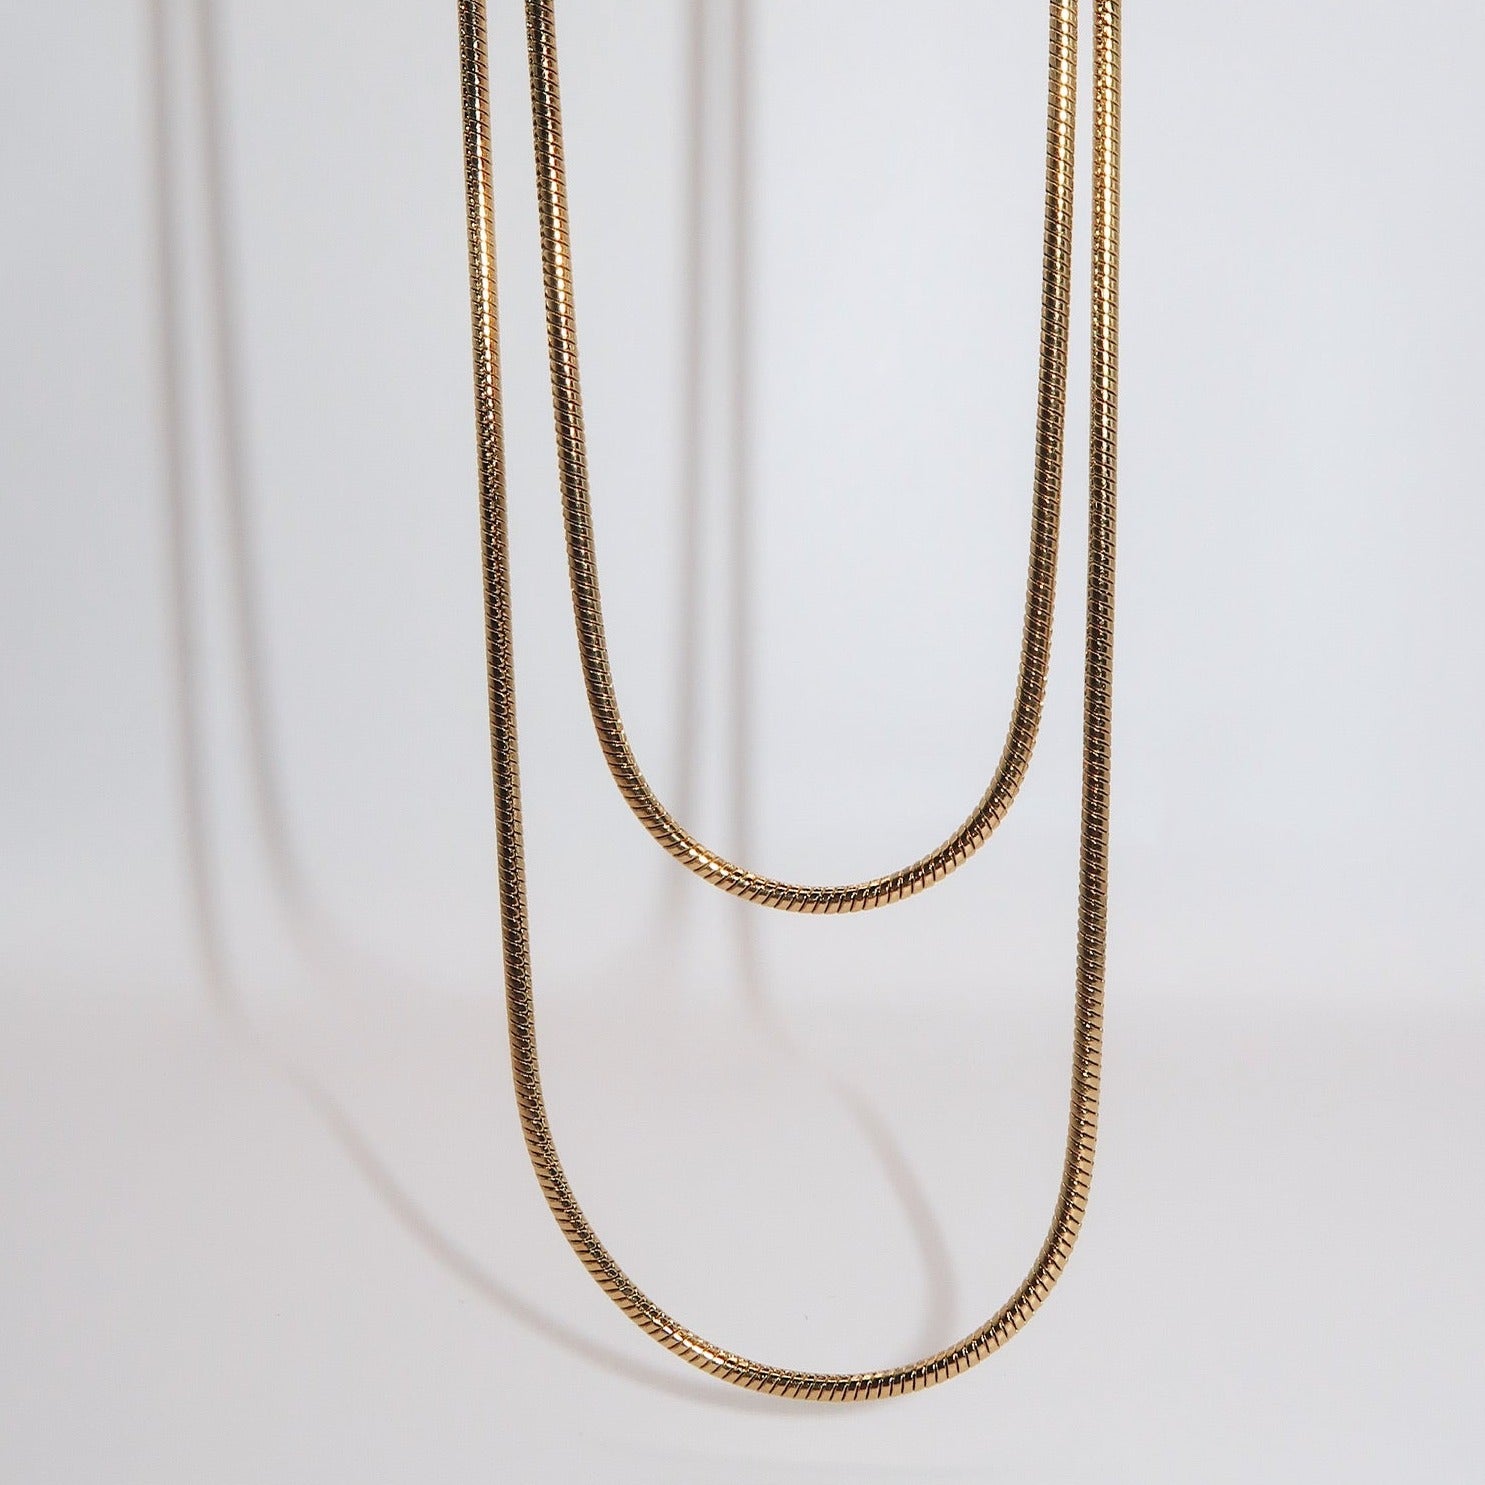 CLAIRE - 18K PVD Gold Plated Double Layered Necklace - Mixed Metals